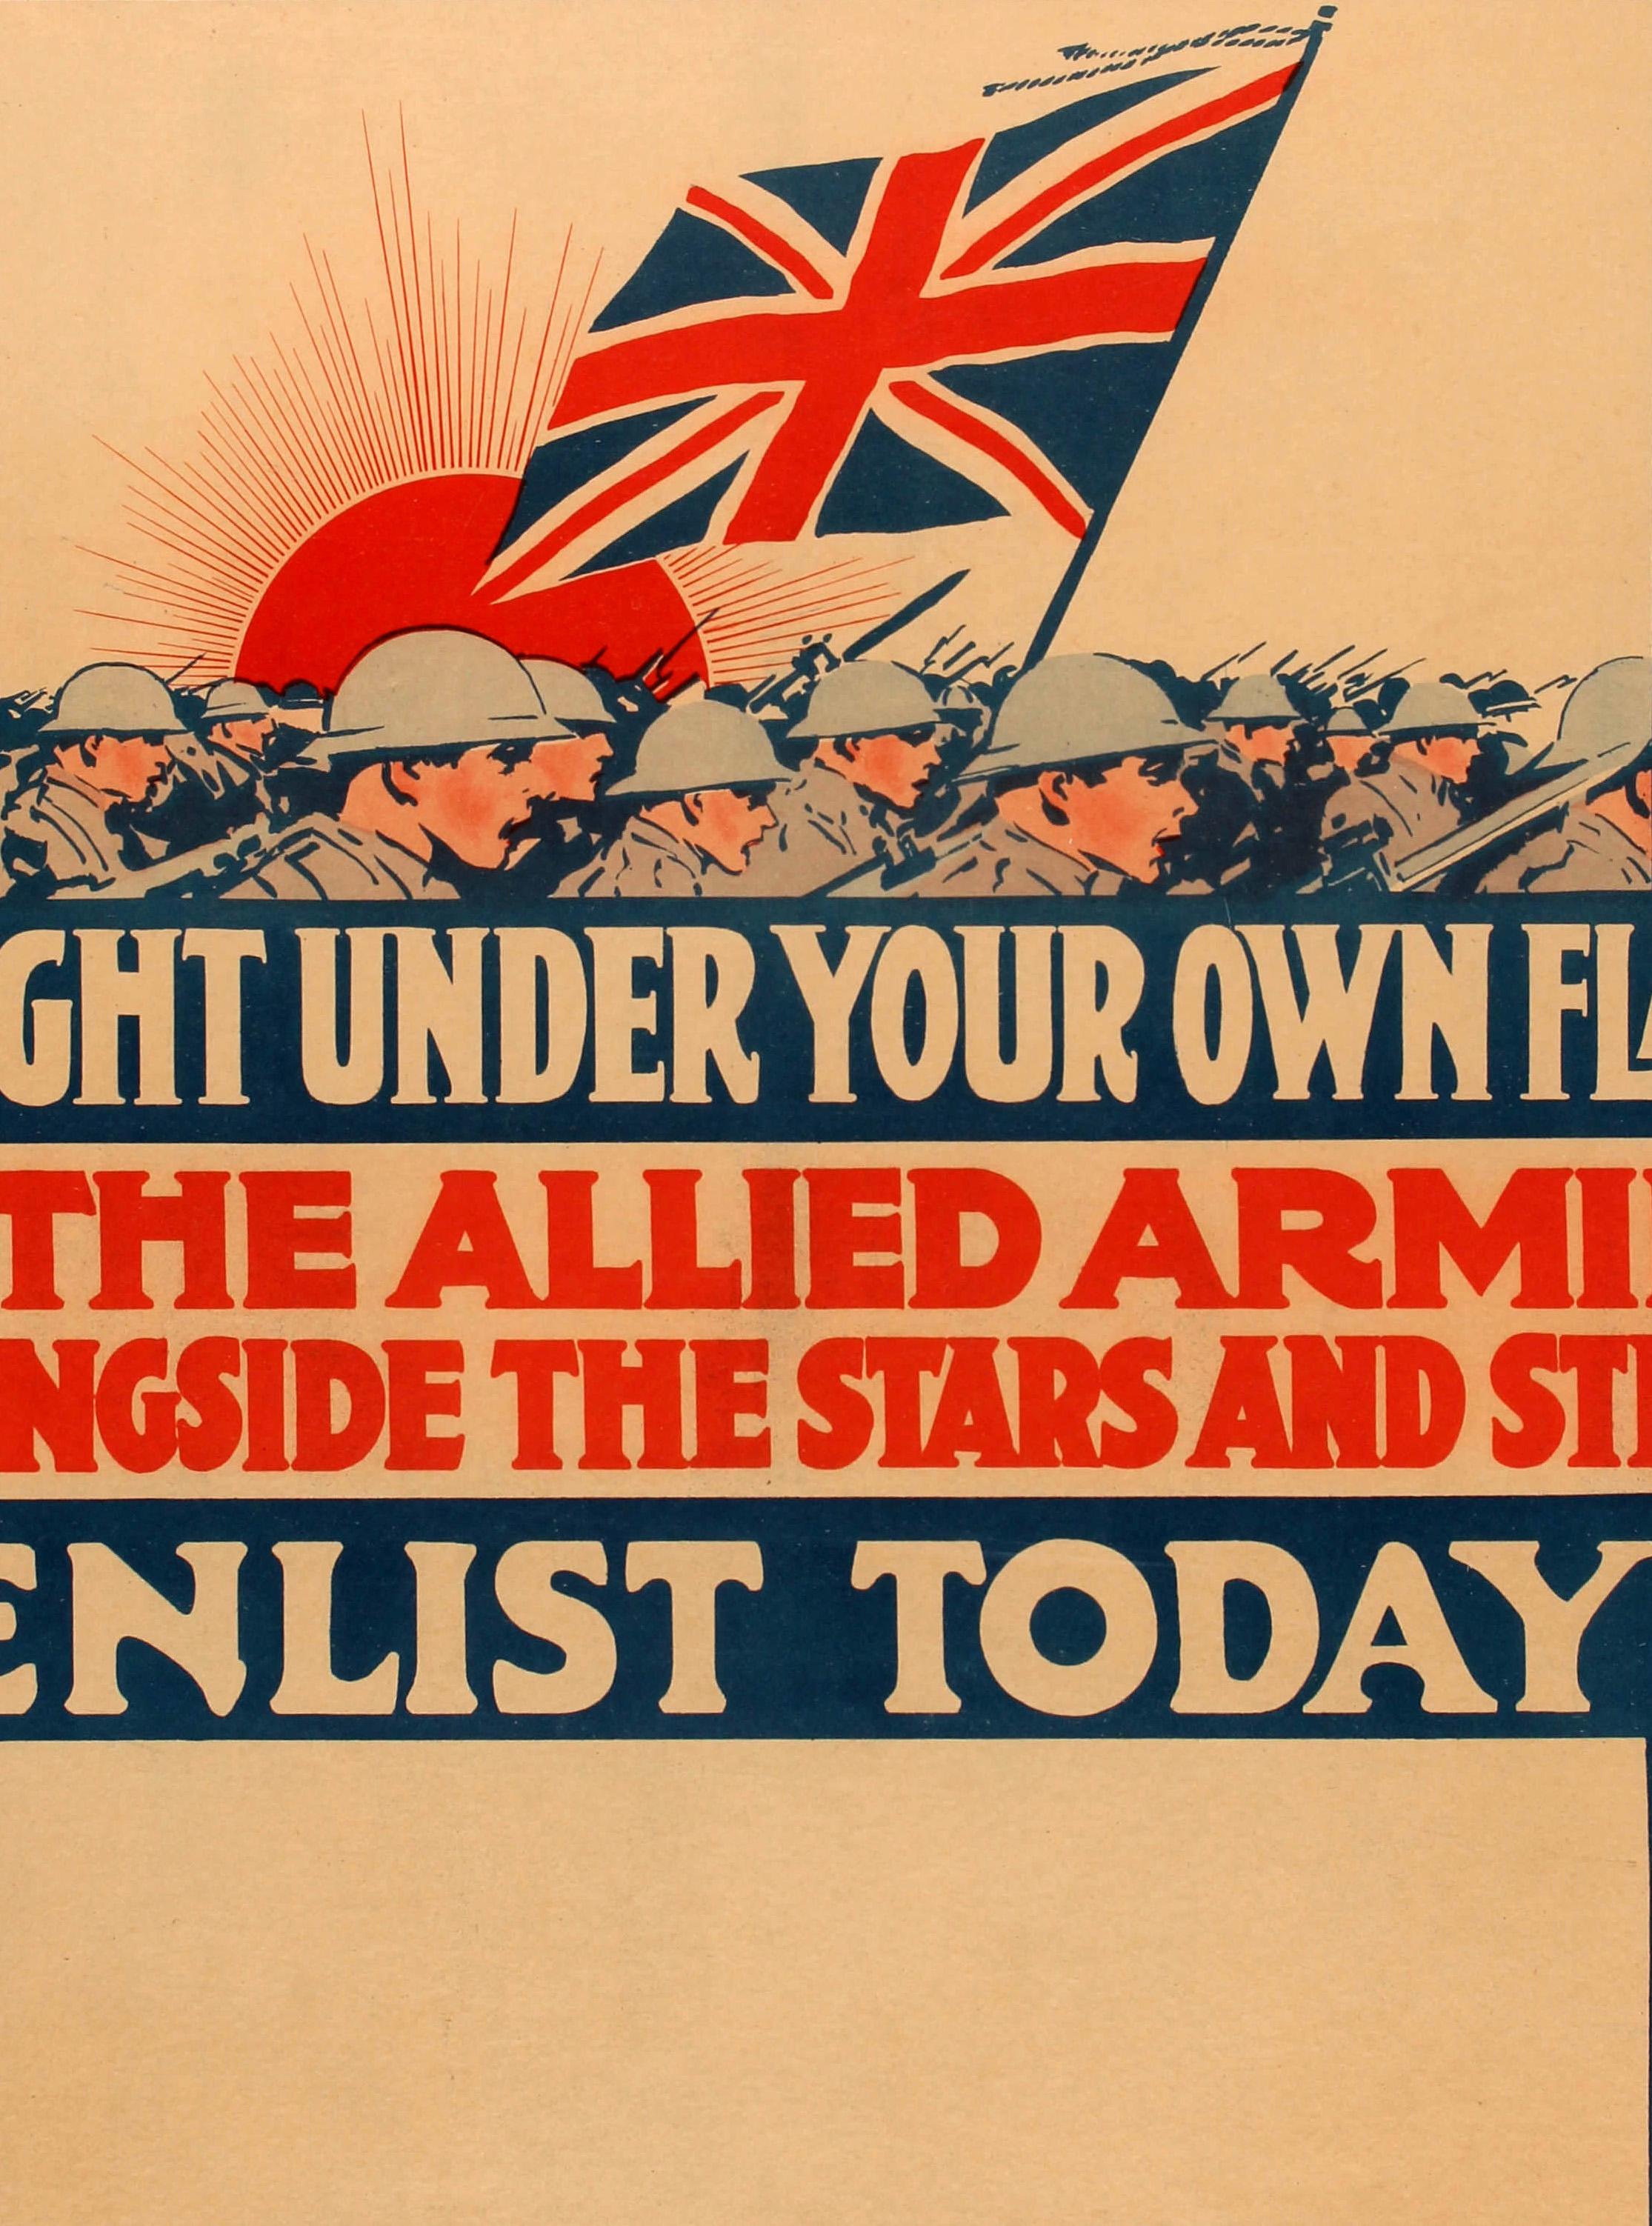 Original antique World War One propaganda poster, Britons and Canadians fight under your own flag in the allied armies alongside the stars and stripes enlist today! Dynamic design featuring soldiers marching forward with a sun in the background and